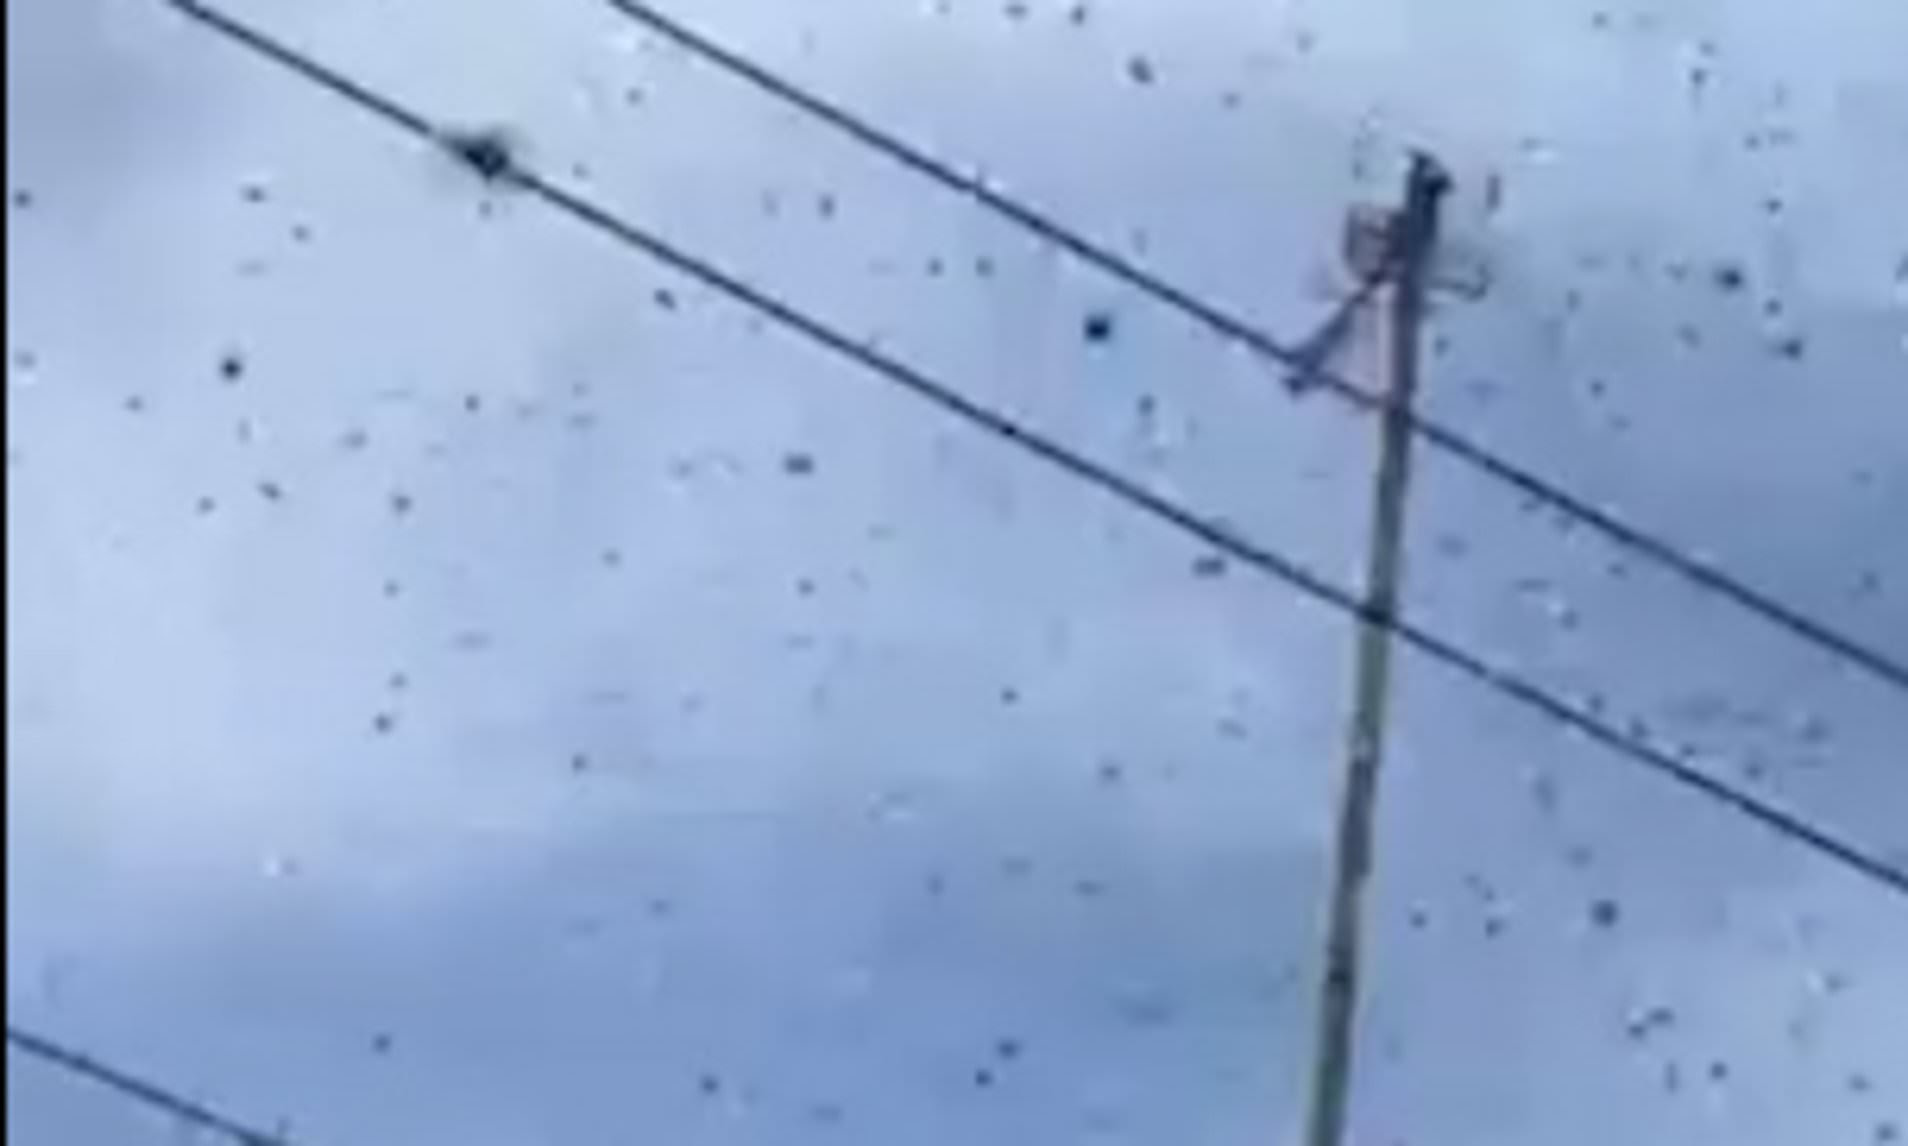 Watch massive swarm of WASPS that has invaded family's garden